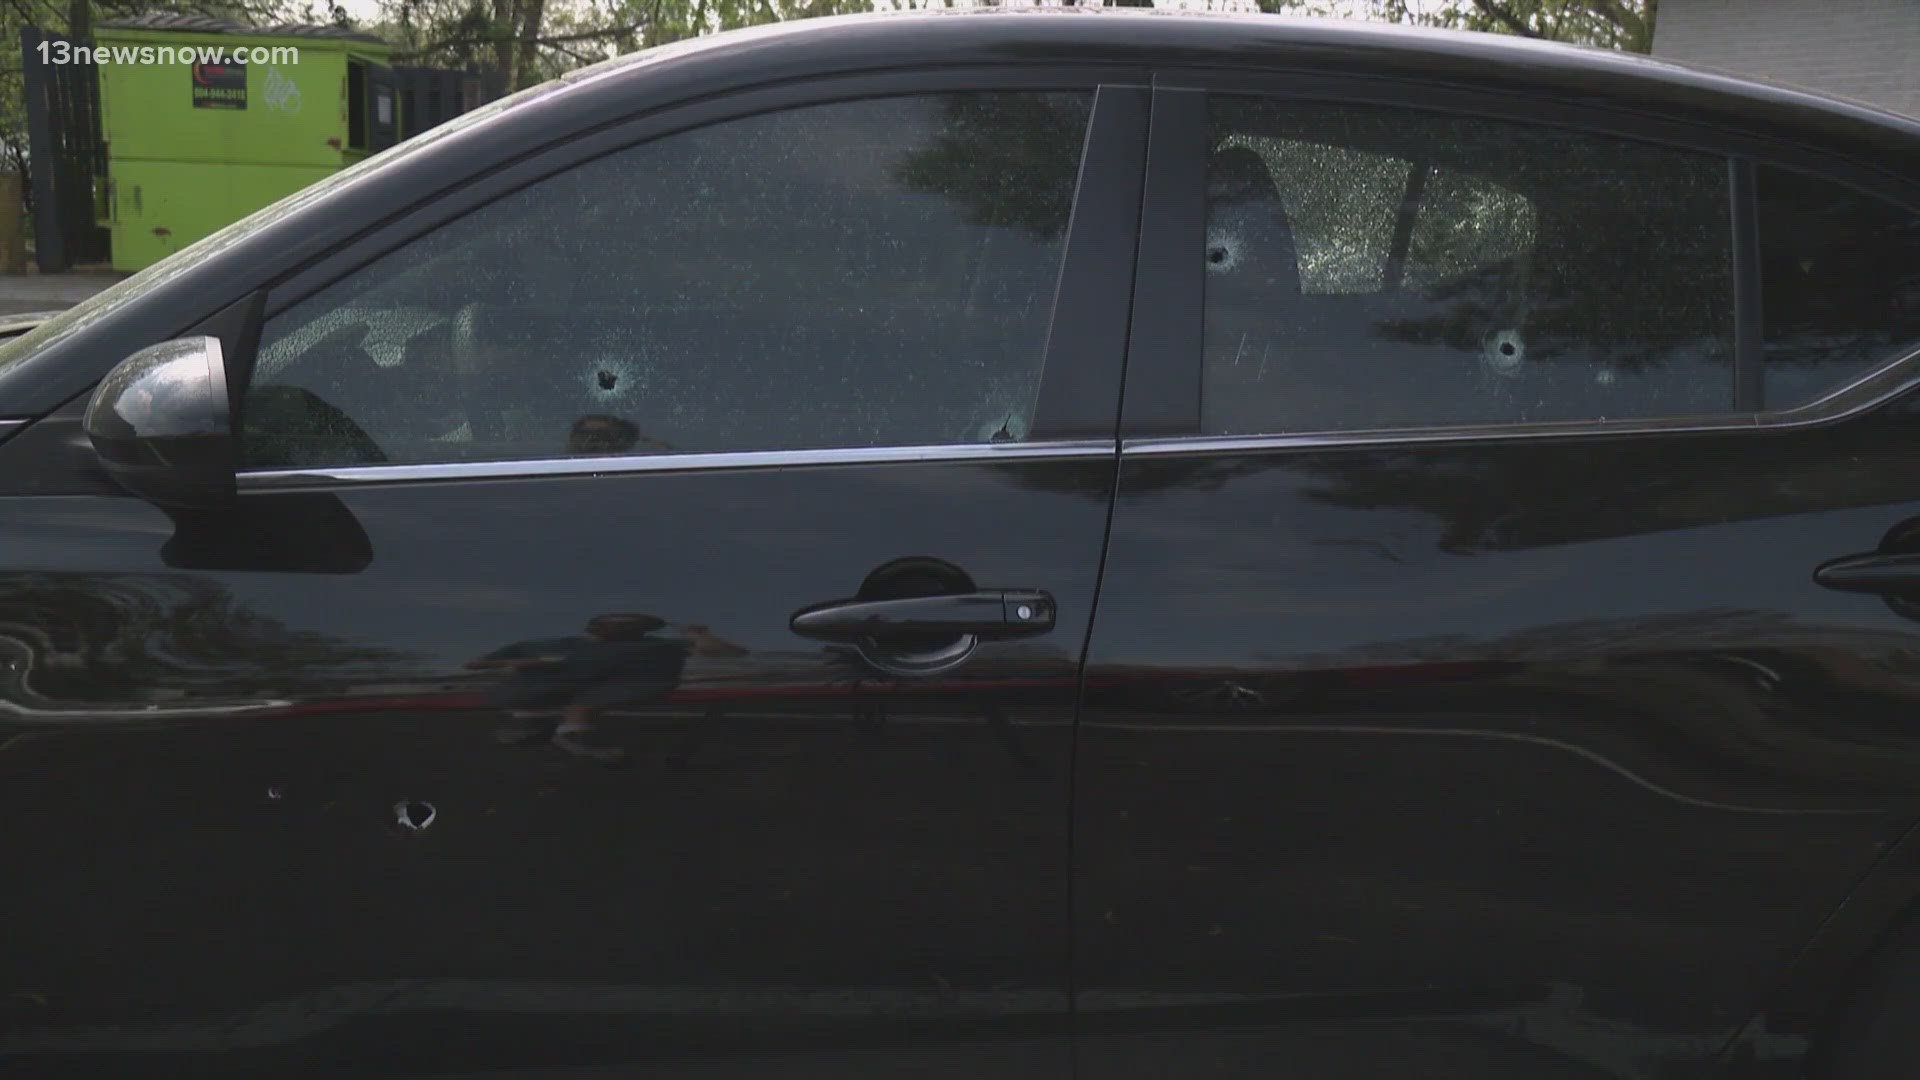 Neighbors woke up to bullet holes and damage on their cars and homes. Now, police are trying to determine if this resulted in four walk-in gunshot victims.